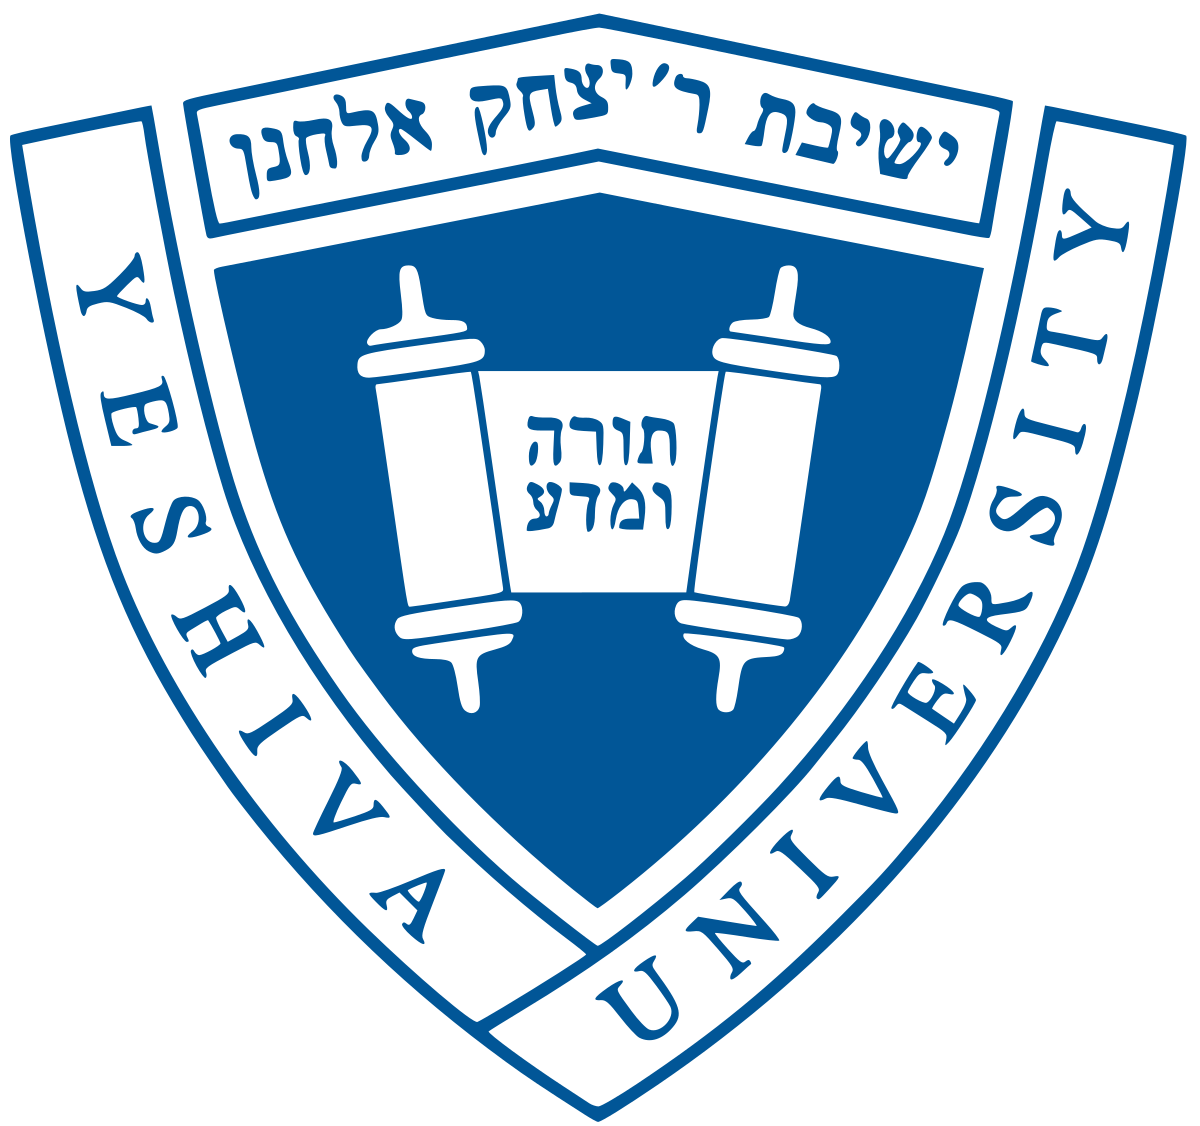 Yeshiva University logo, a client of digital archiving company Scan A Lot